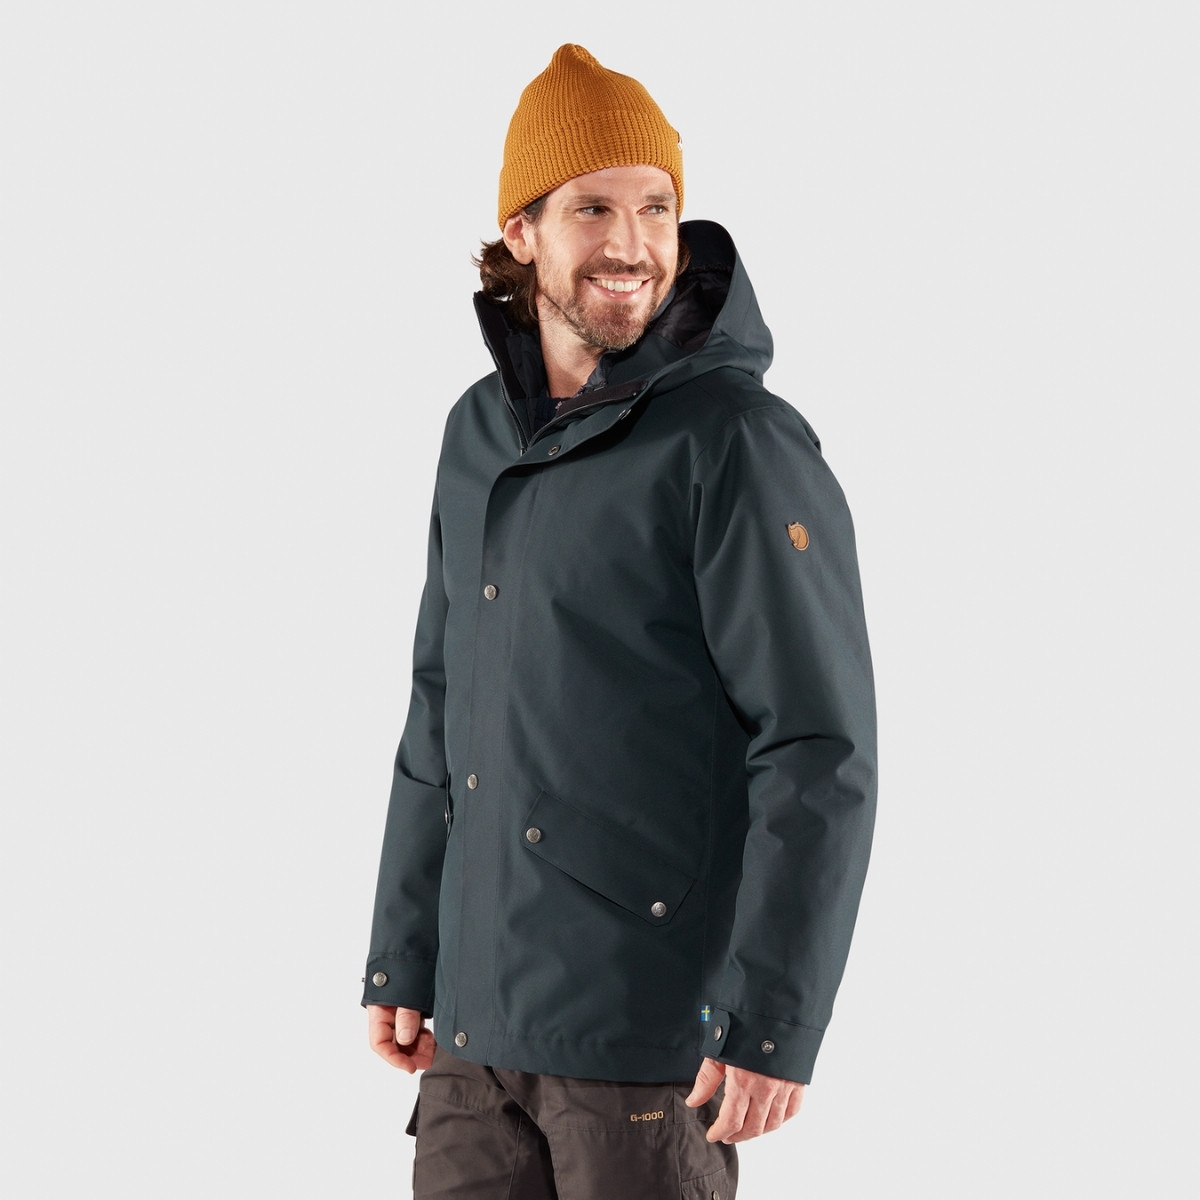 Visby 3 in 1 Jacket M